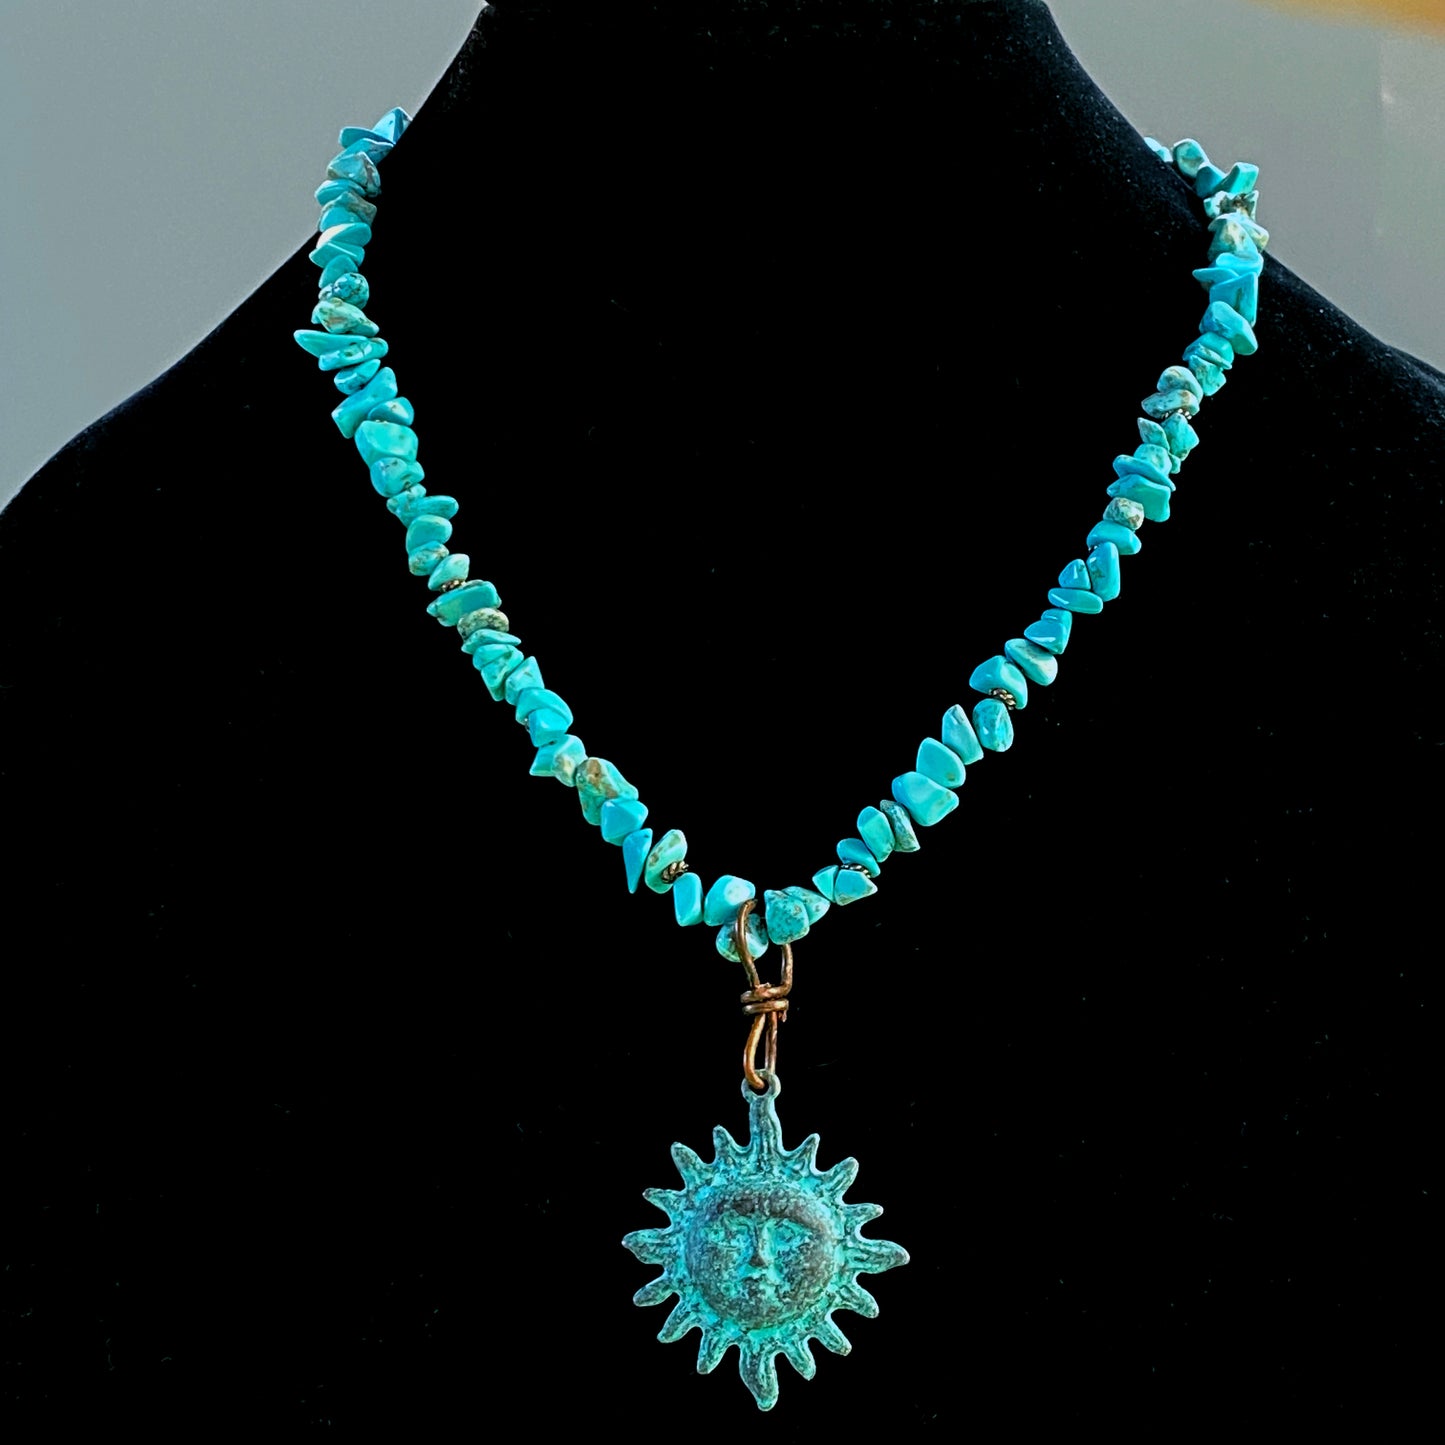 Natural Turquoise gemstone  and copper Sun pendant beaded necklace